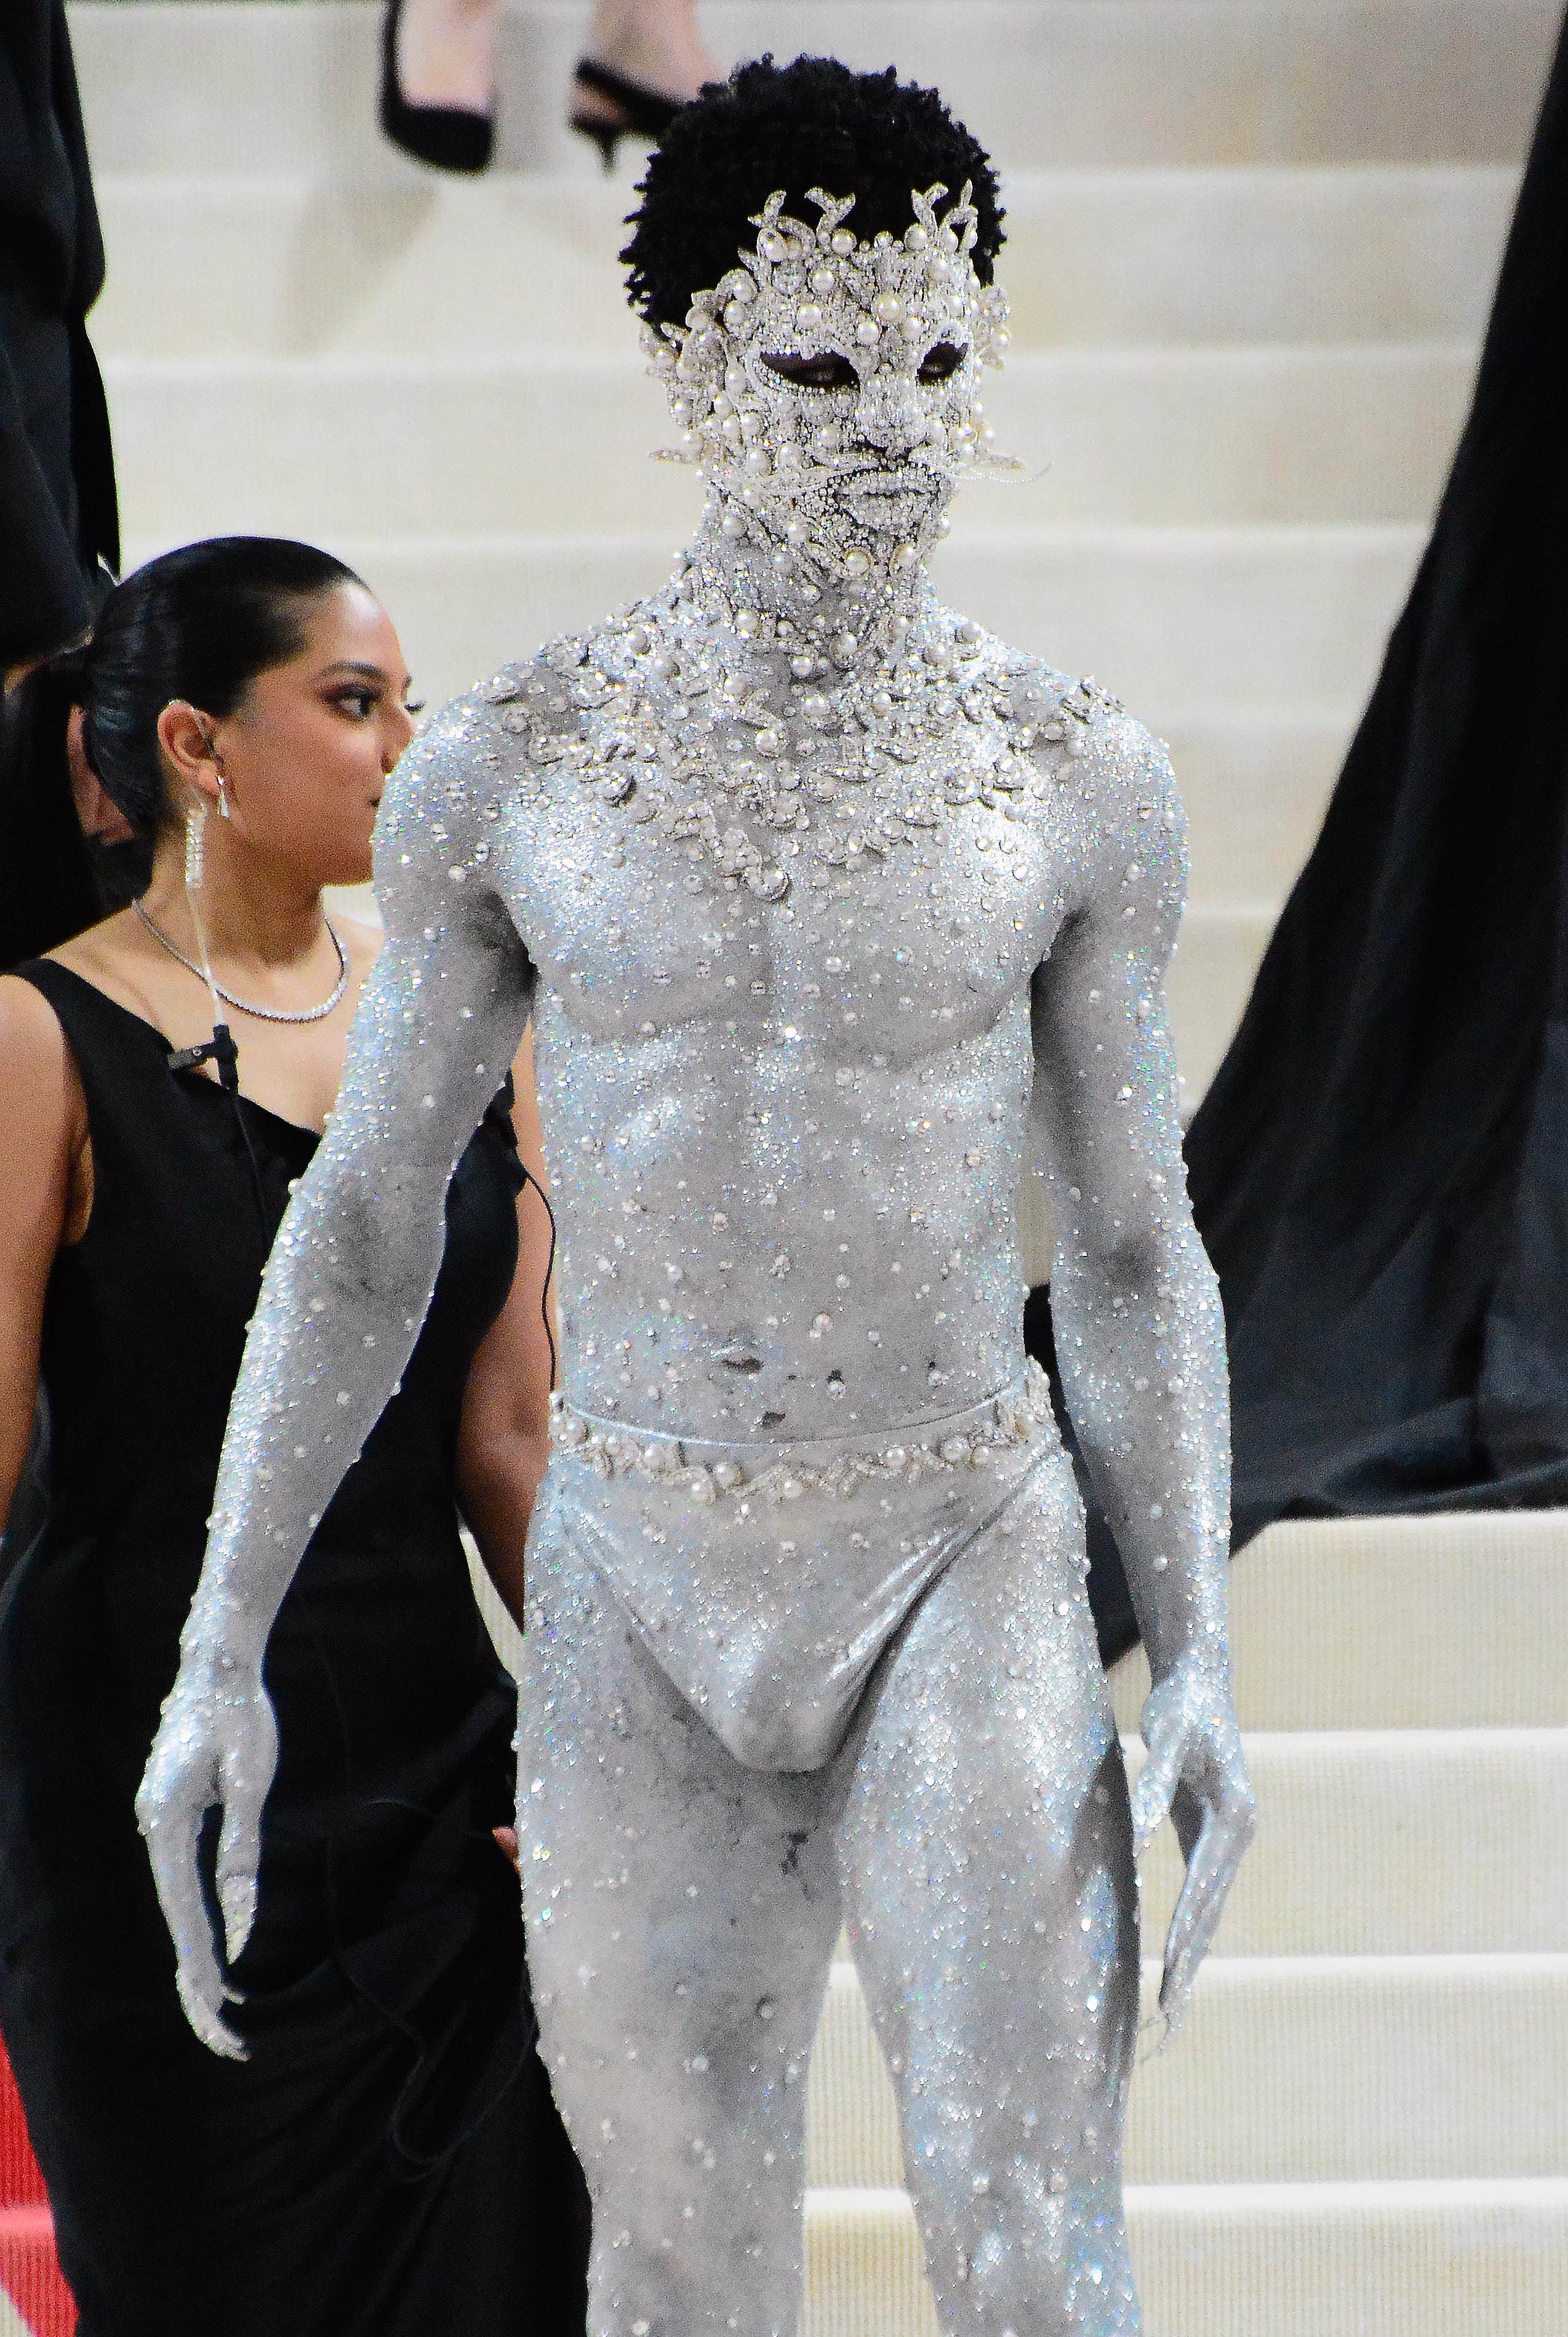 Lil Nas X poses on the Met Gala red carpet wearing full glitter bodypaint a jewel-encrusted face mask